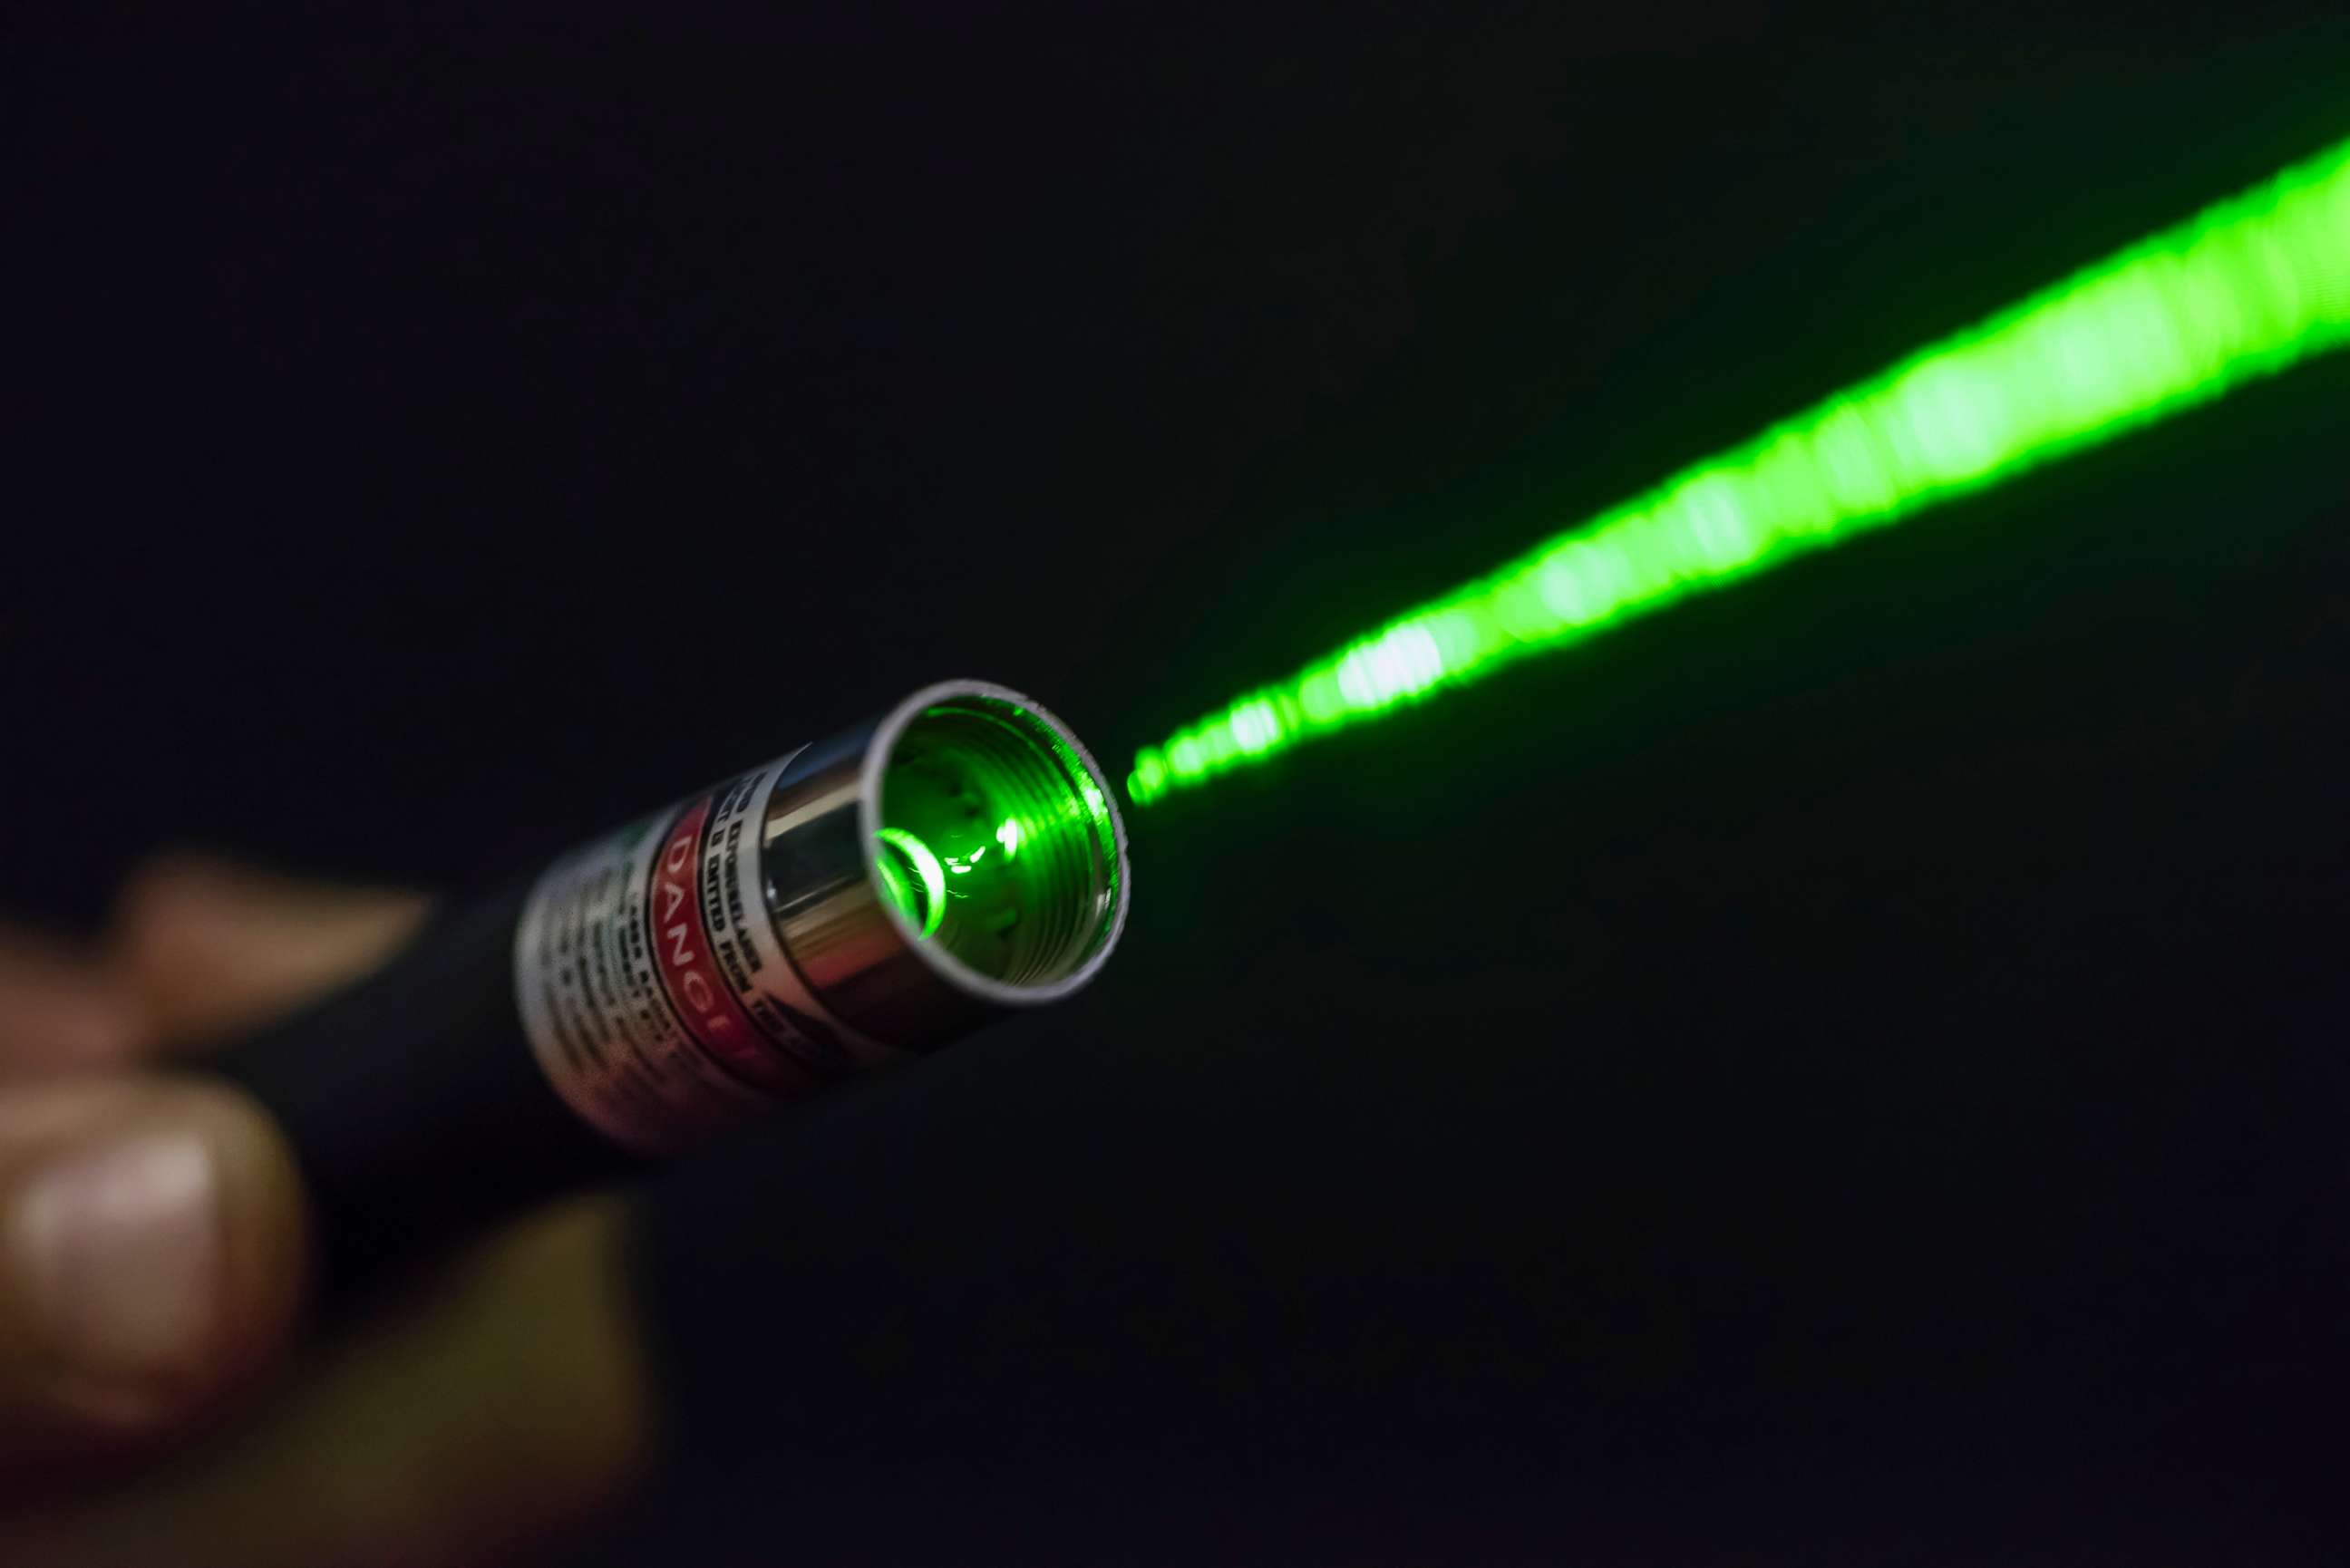 PHOTO: A stock photo showing a green laser beam coming from a hand-held laser pointer.